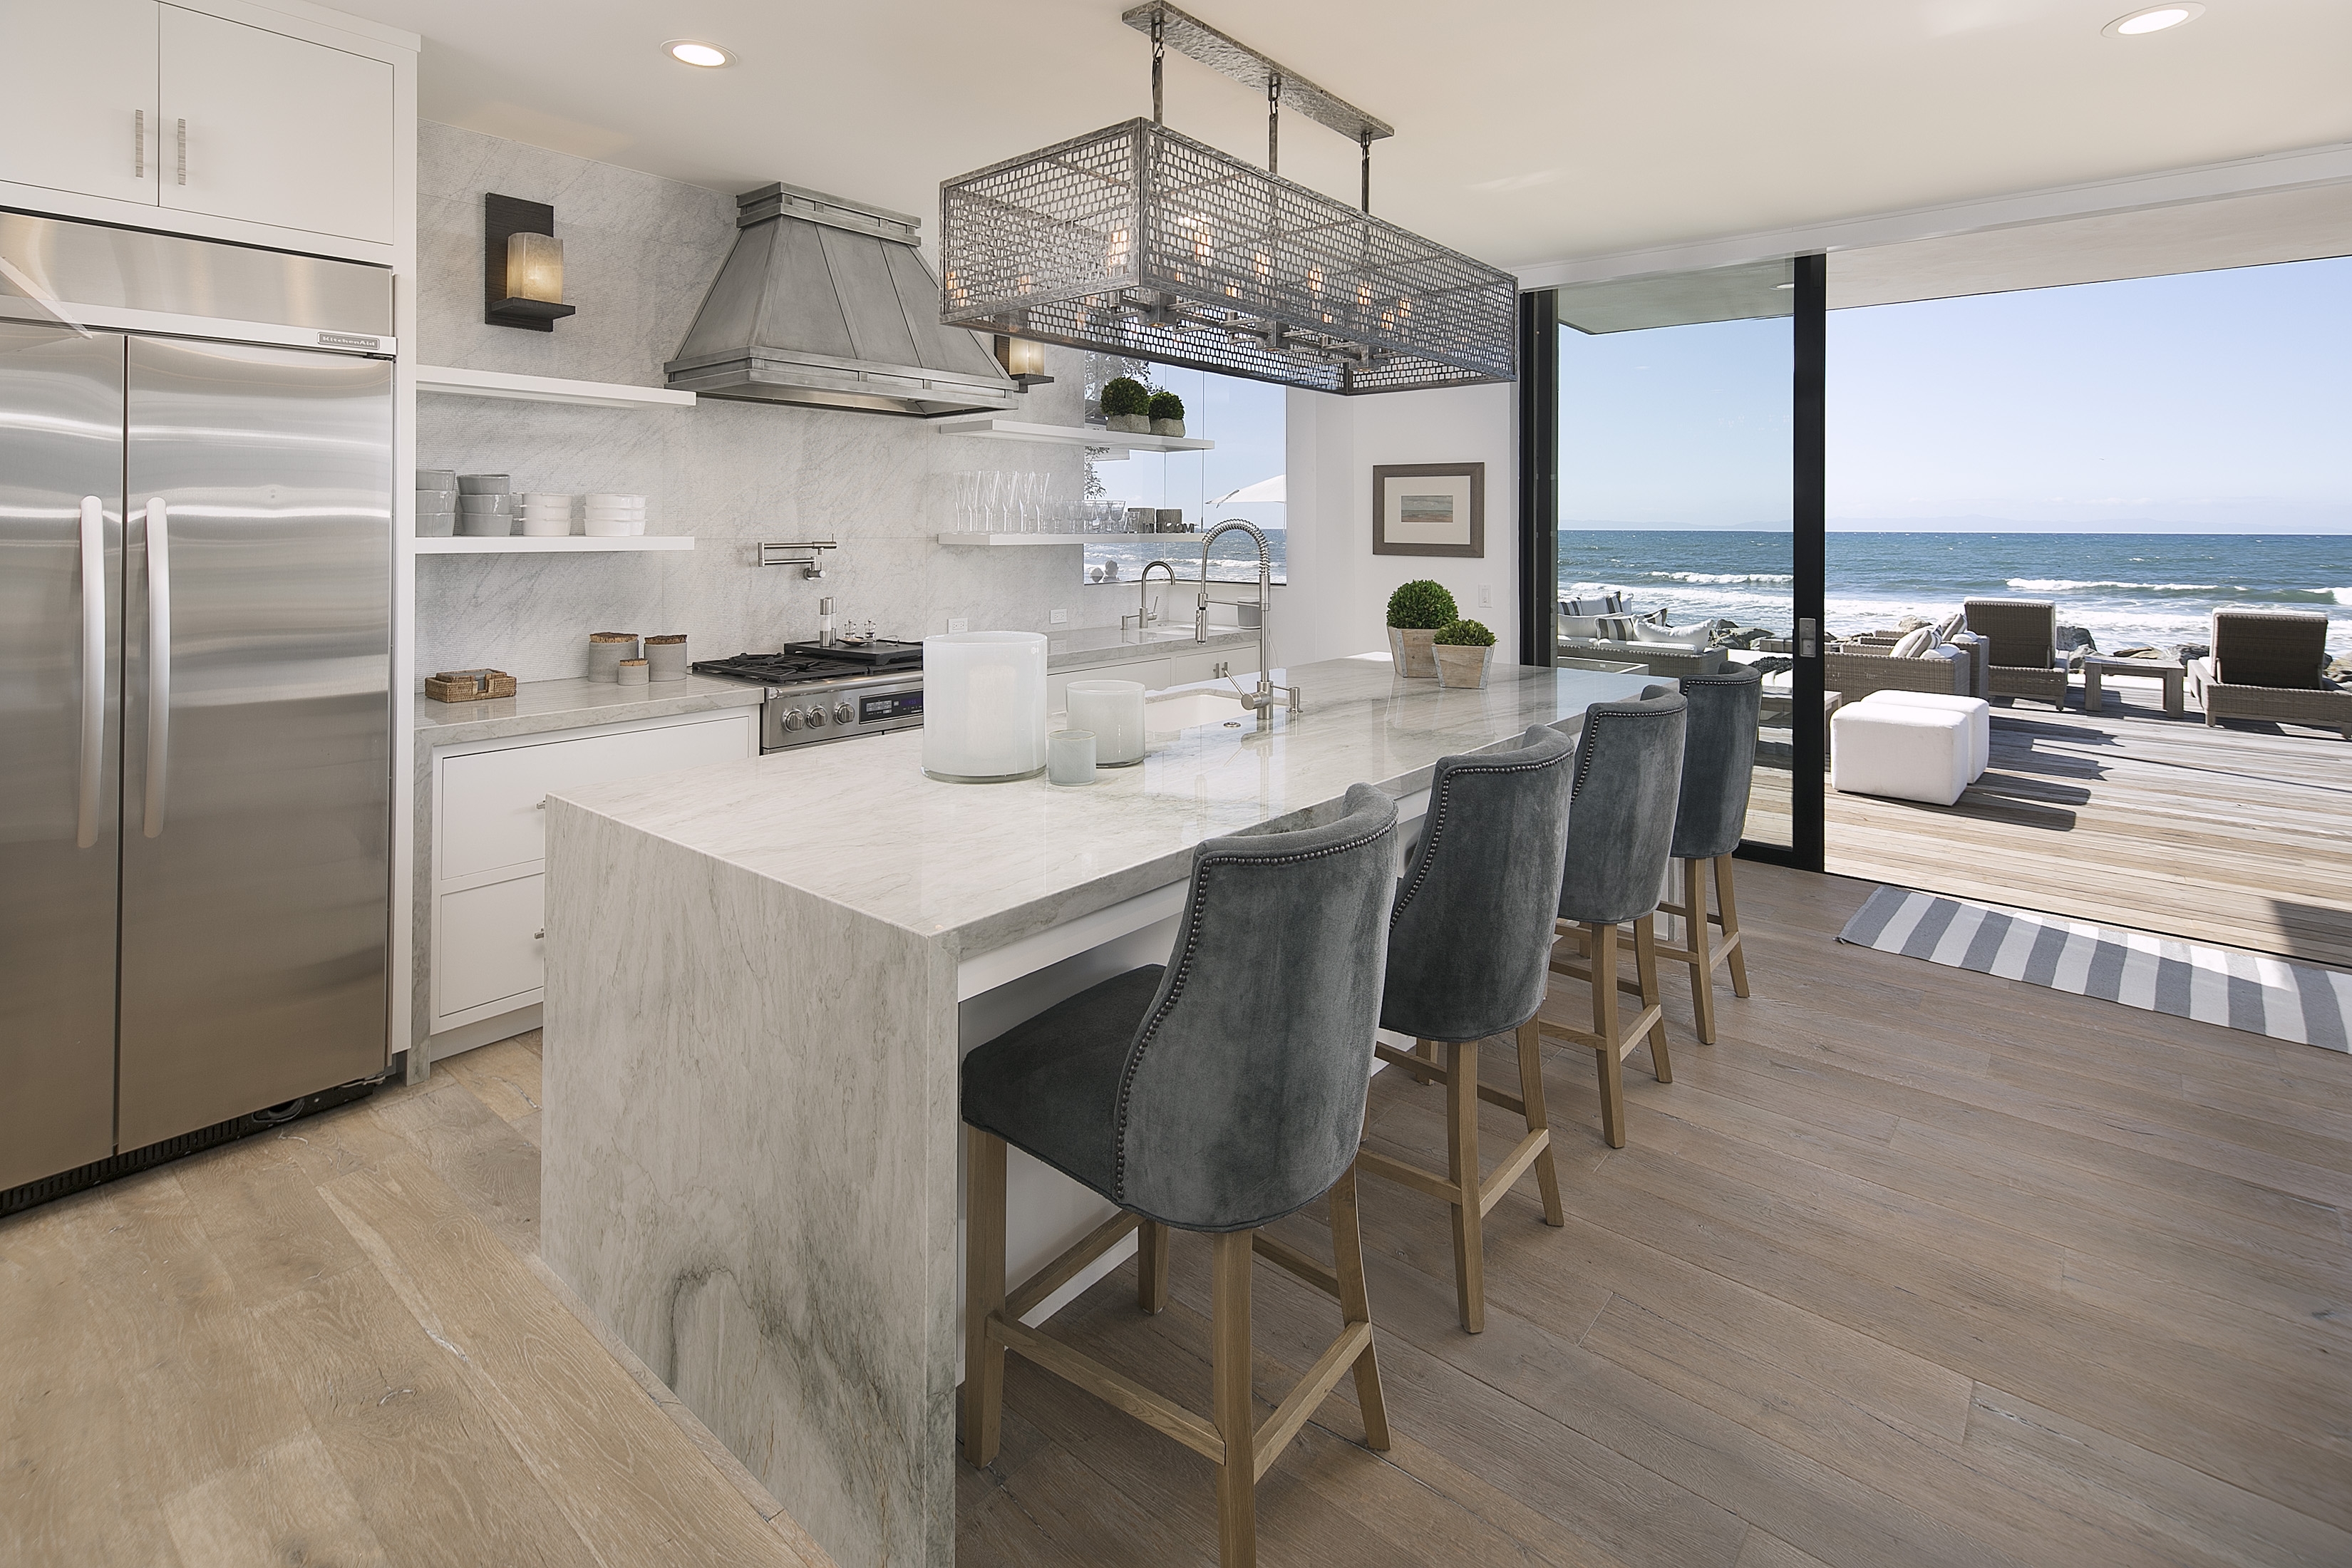 open kitchen with bar seating and view of ocean